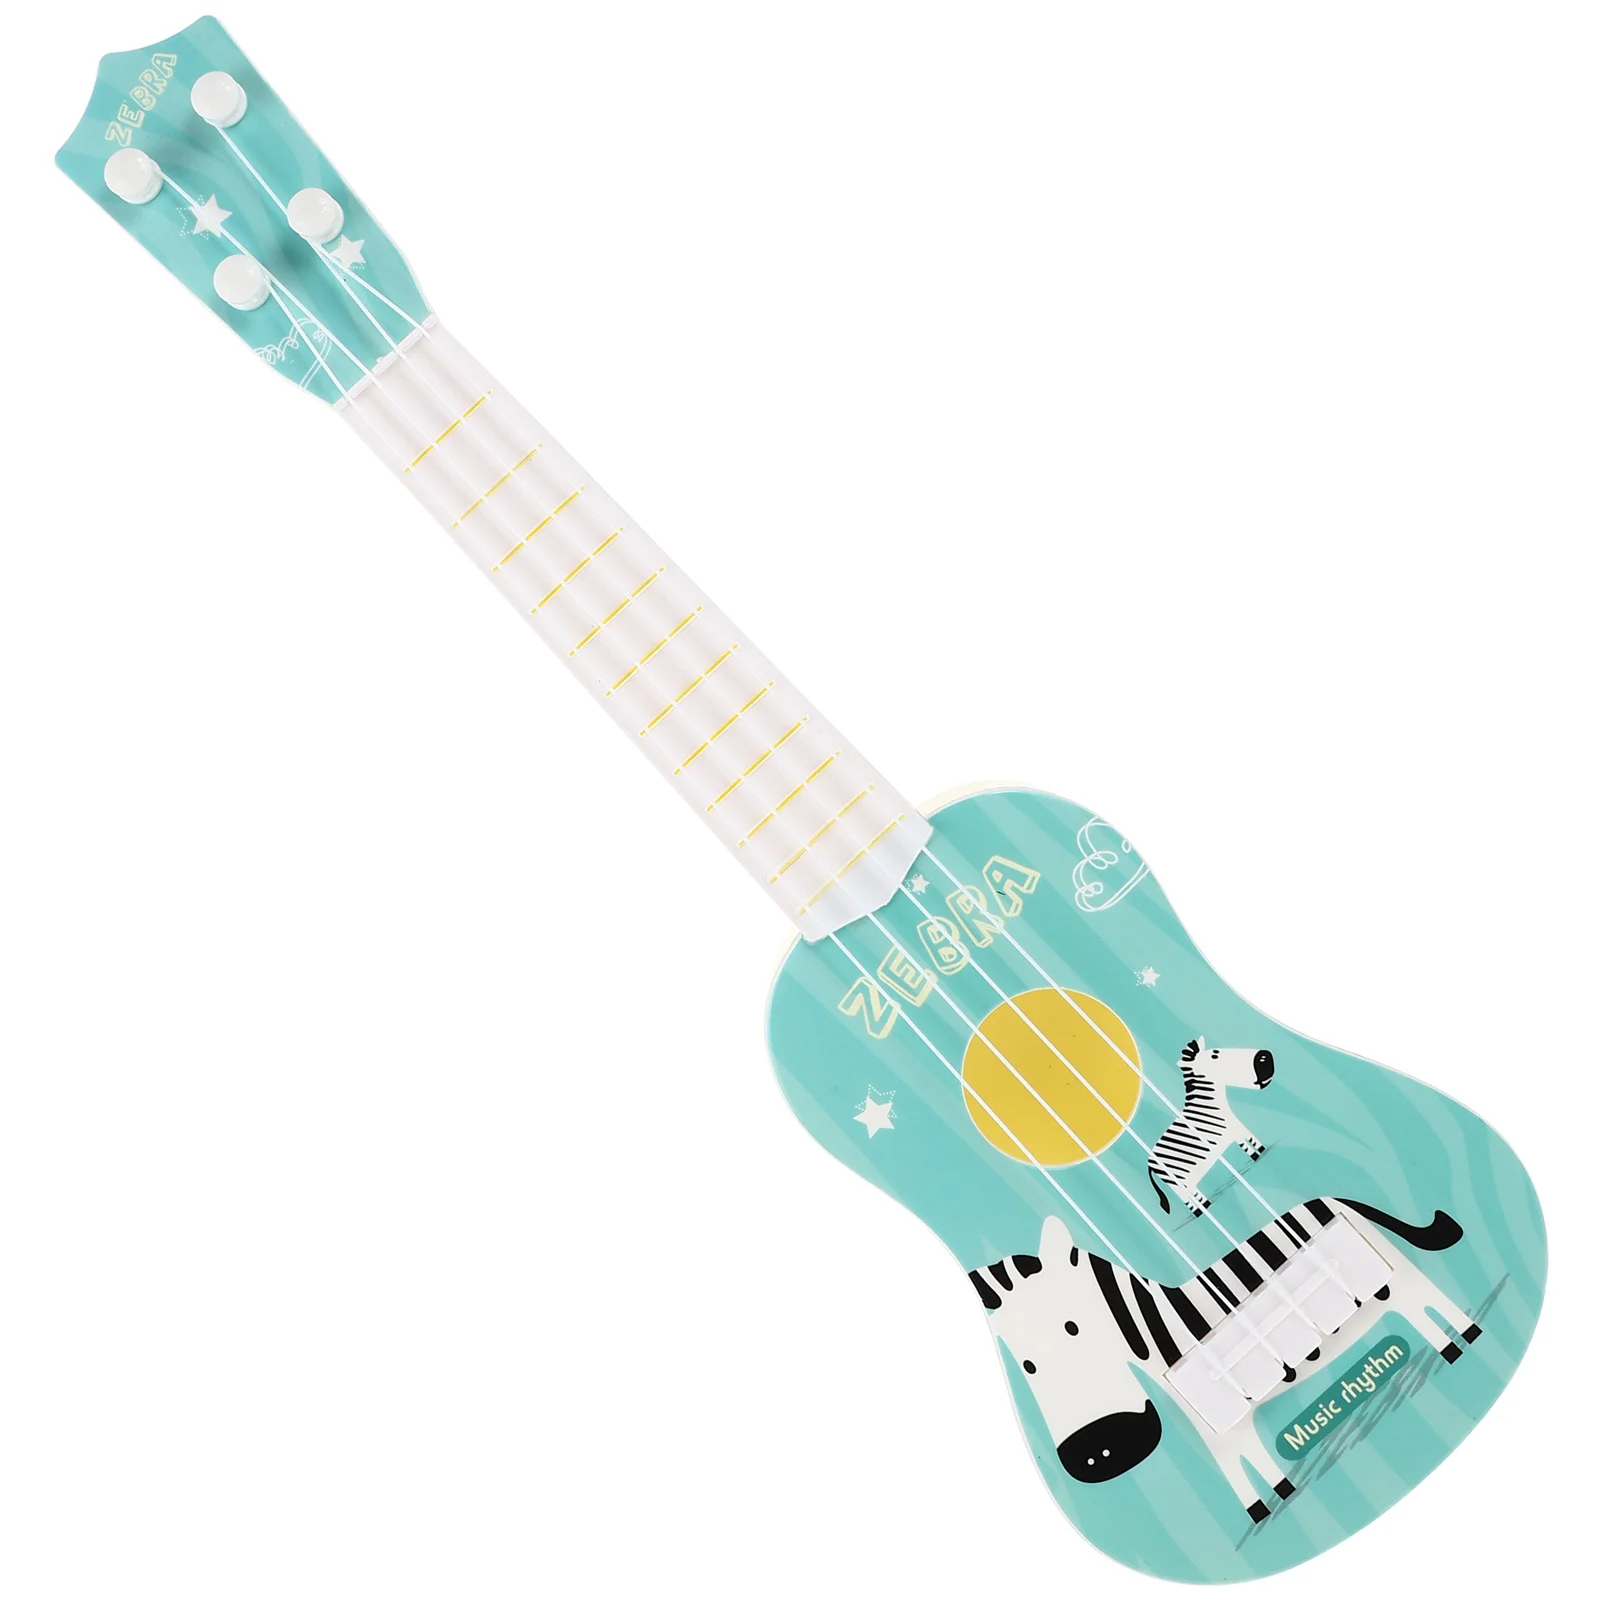 

Children's Ukulele Beginner Musical Instrument Toy Plaything Mini Toys Kids Educational Early Learning Played Toddler Guitar